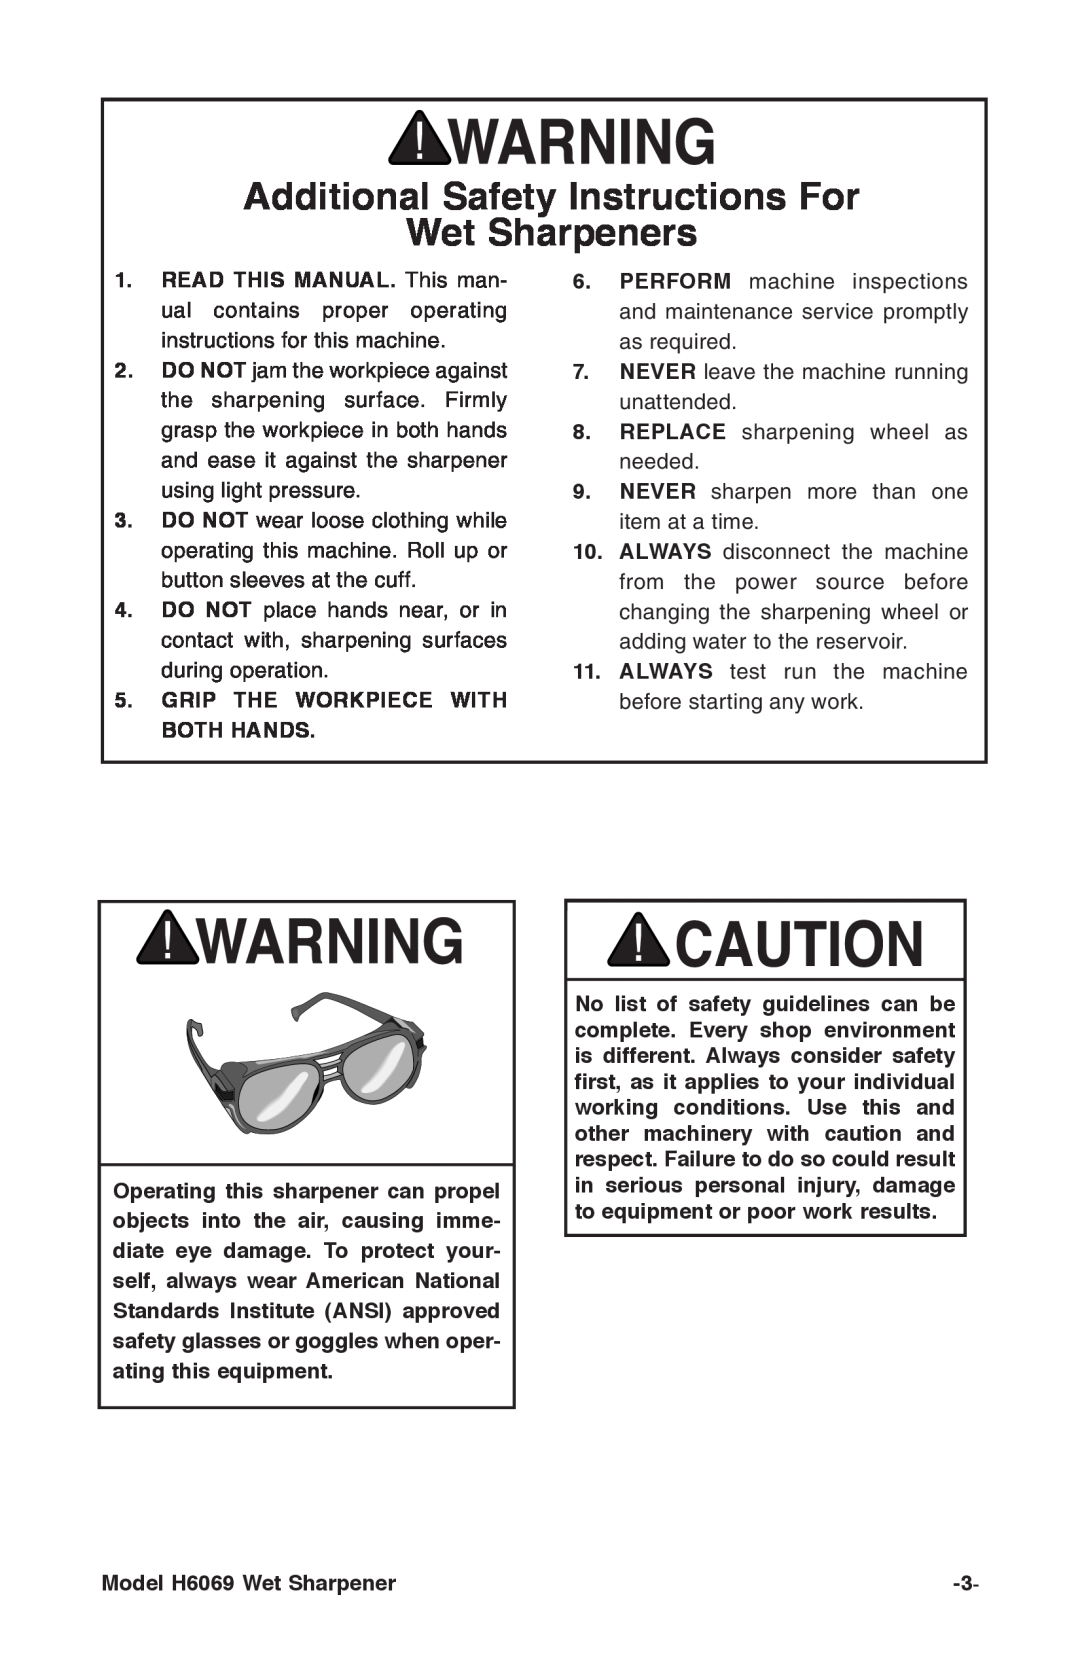 Grizzly H6069 instruction manual Additional Safety Instructions For Wet Sharpeners, Grip The Workpiece With Both Hands 